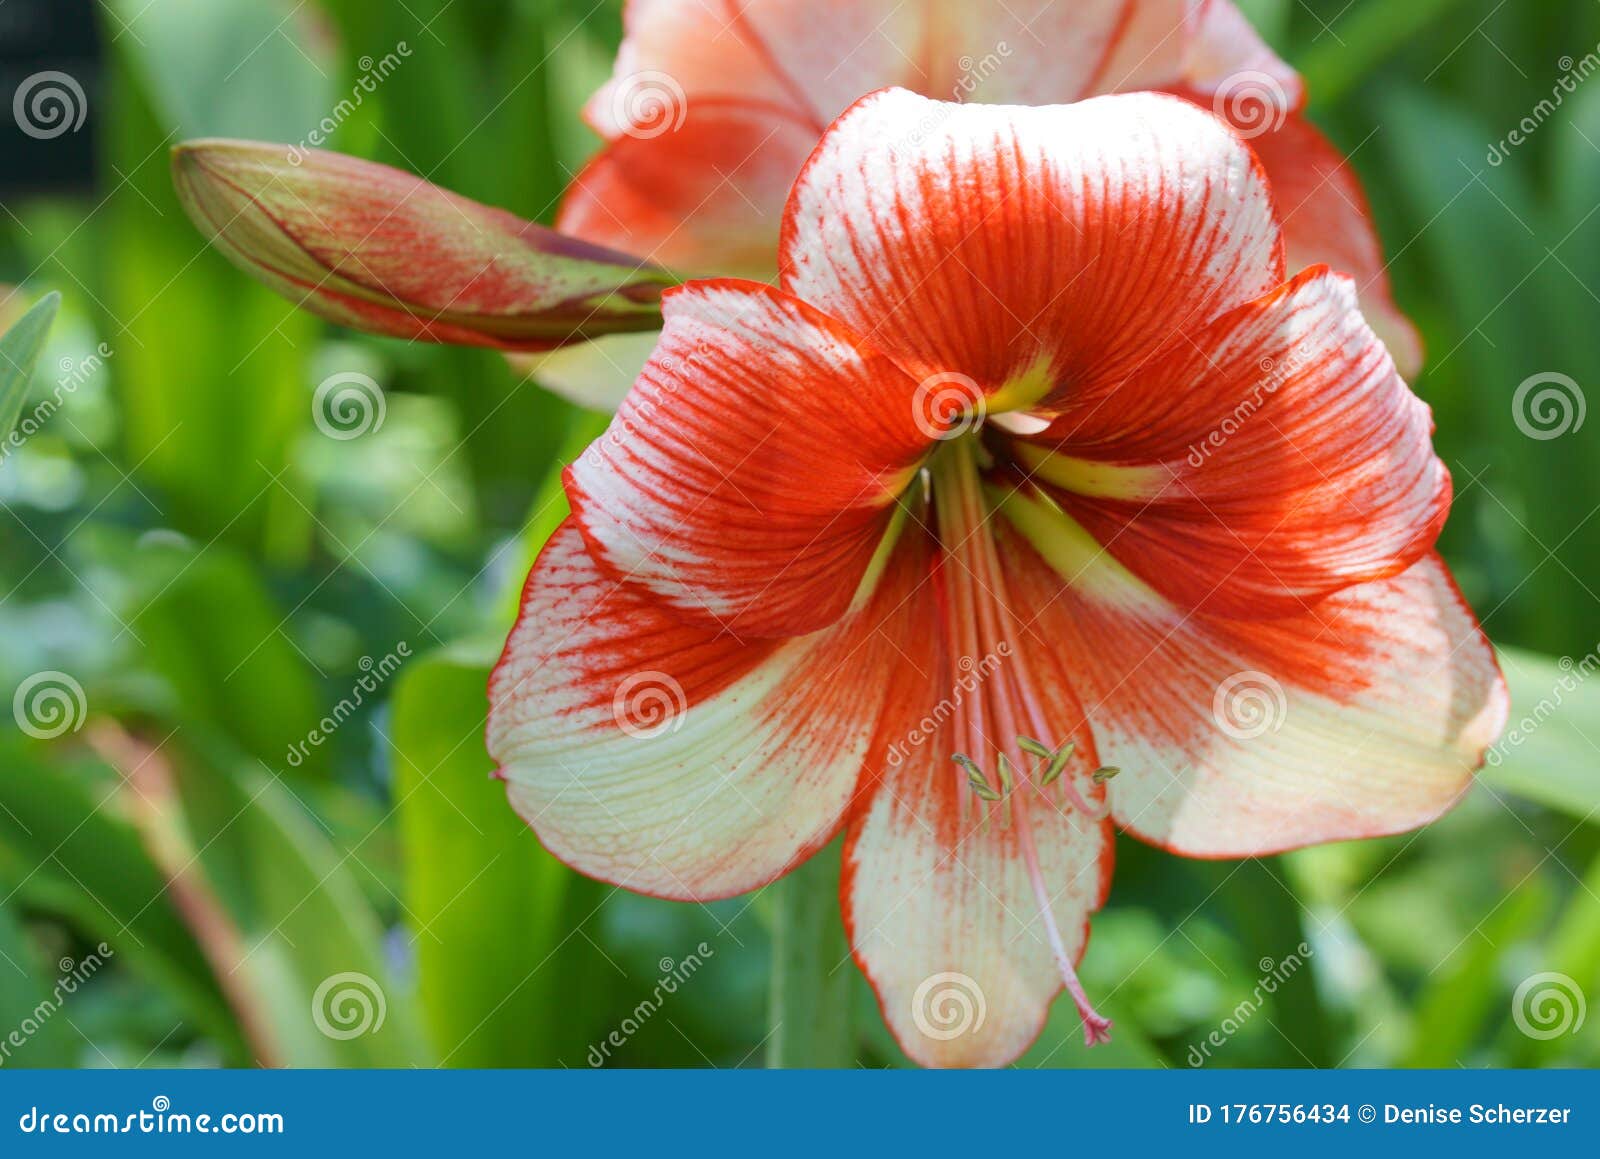 white and red amarillo flower